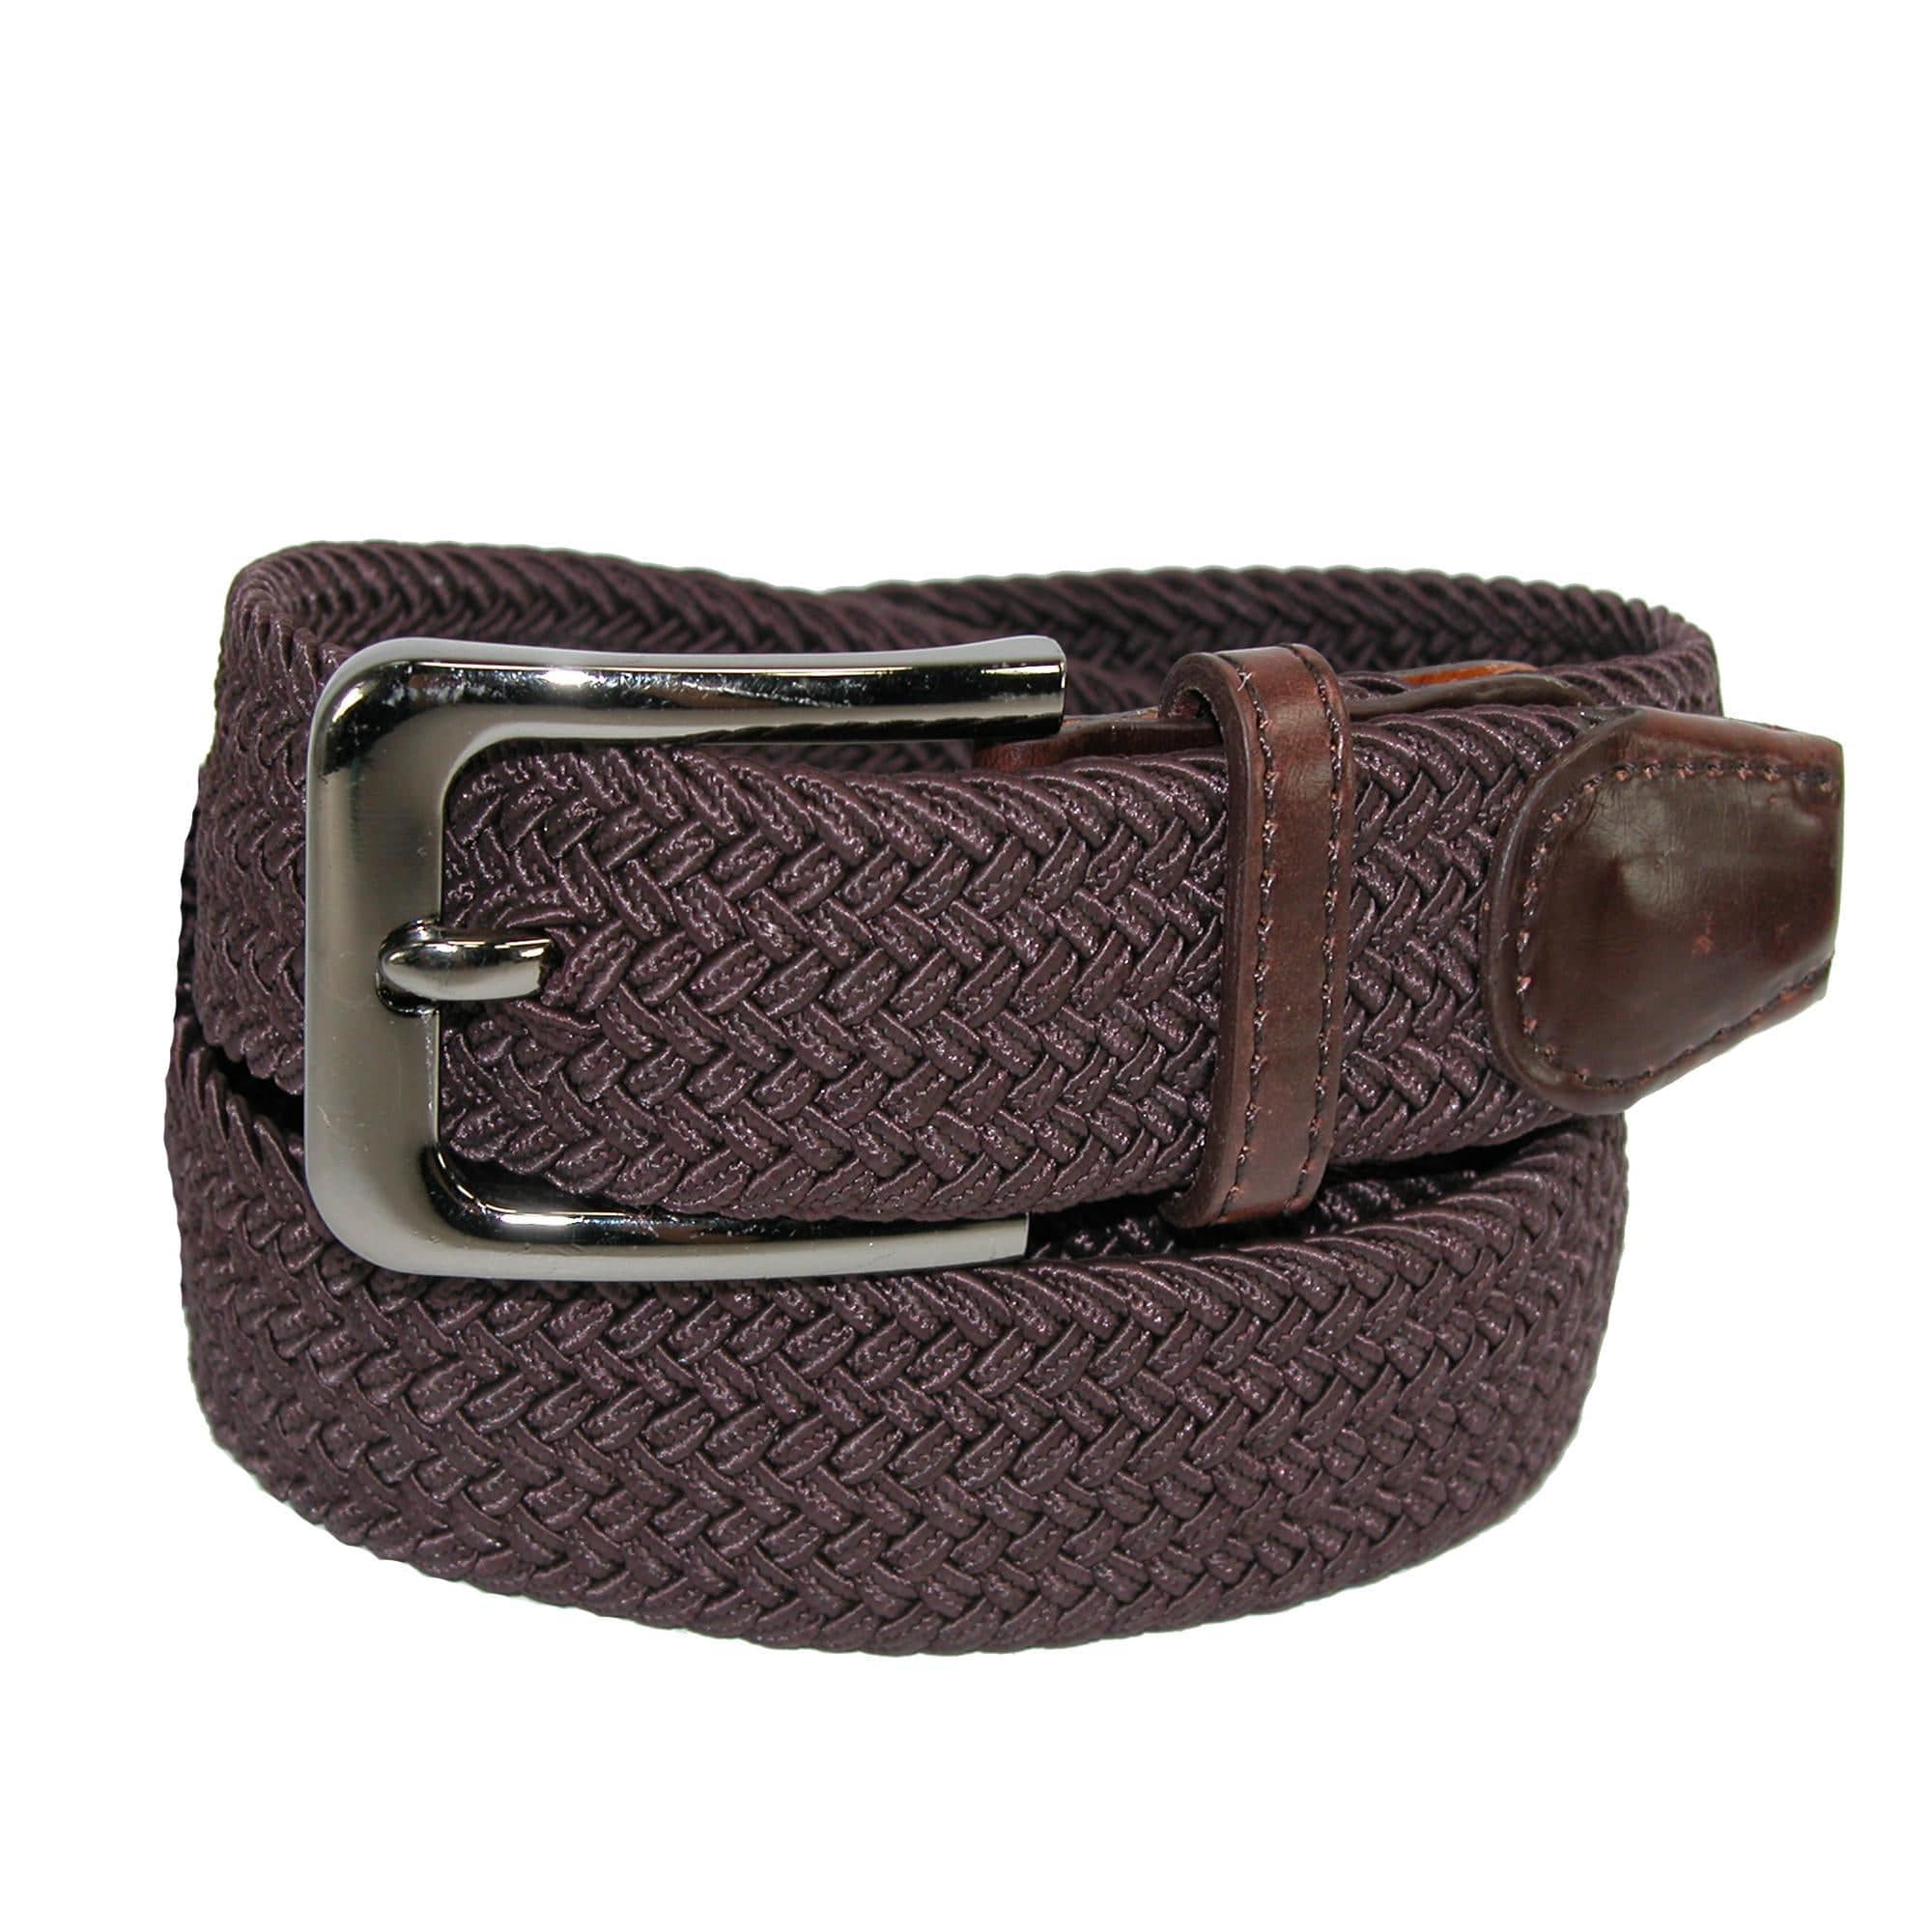 Men's Elastic Braided Stretch Belt with Silver Buckle by CTM